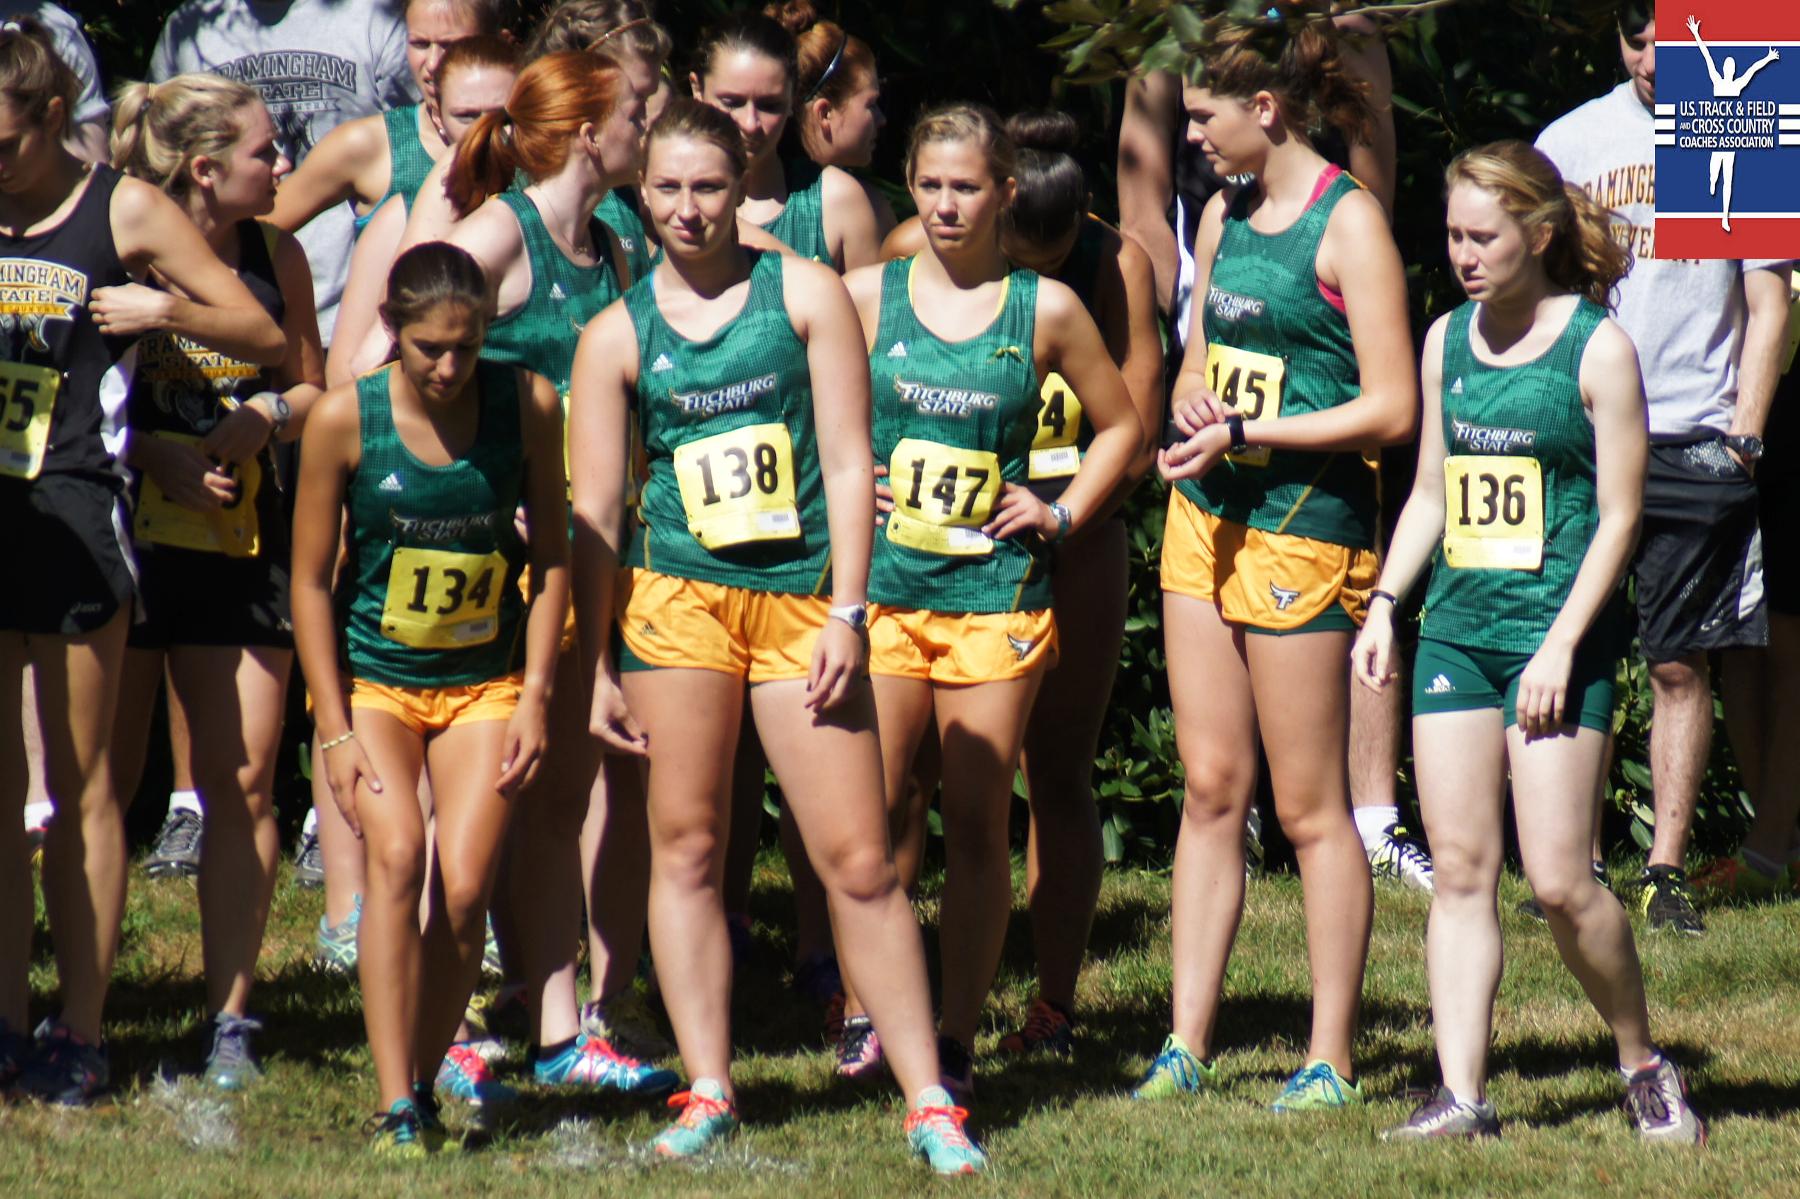 Women’s Cross Country Collects USTFCCCA All-Academic Team Award